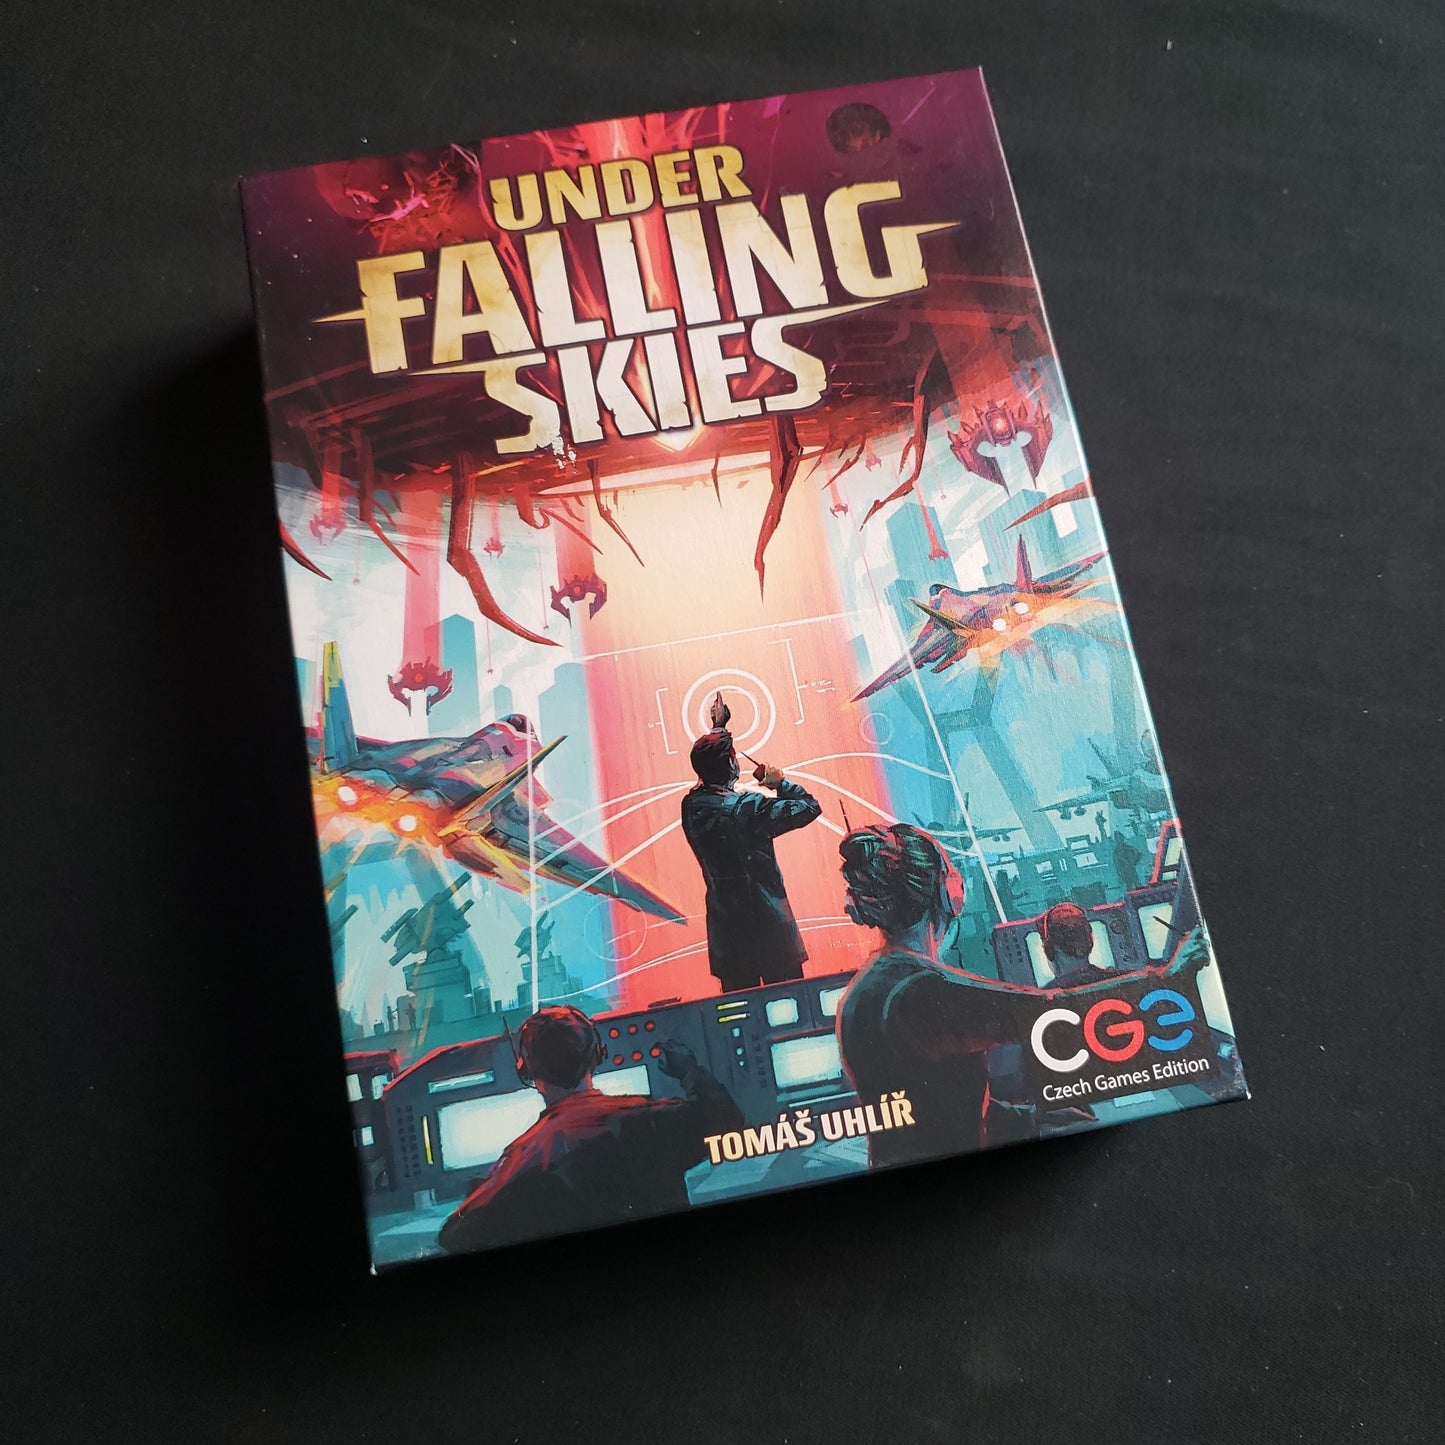 Image shows the front cover of the box of the Under Falling Skies board game